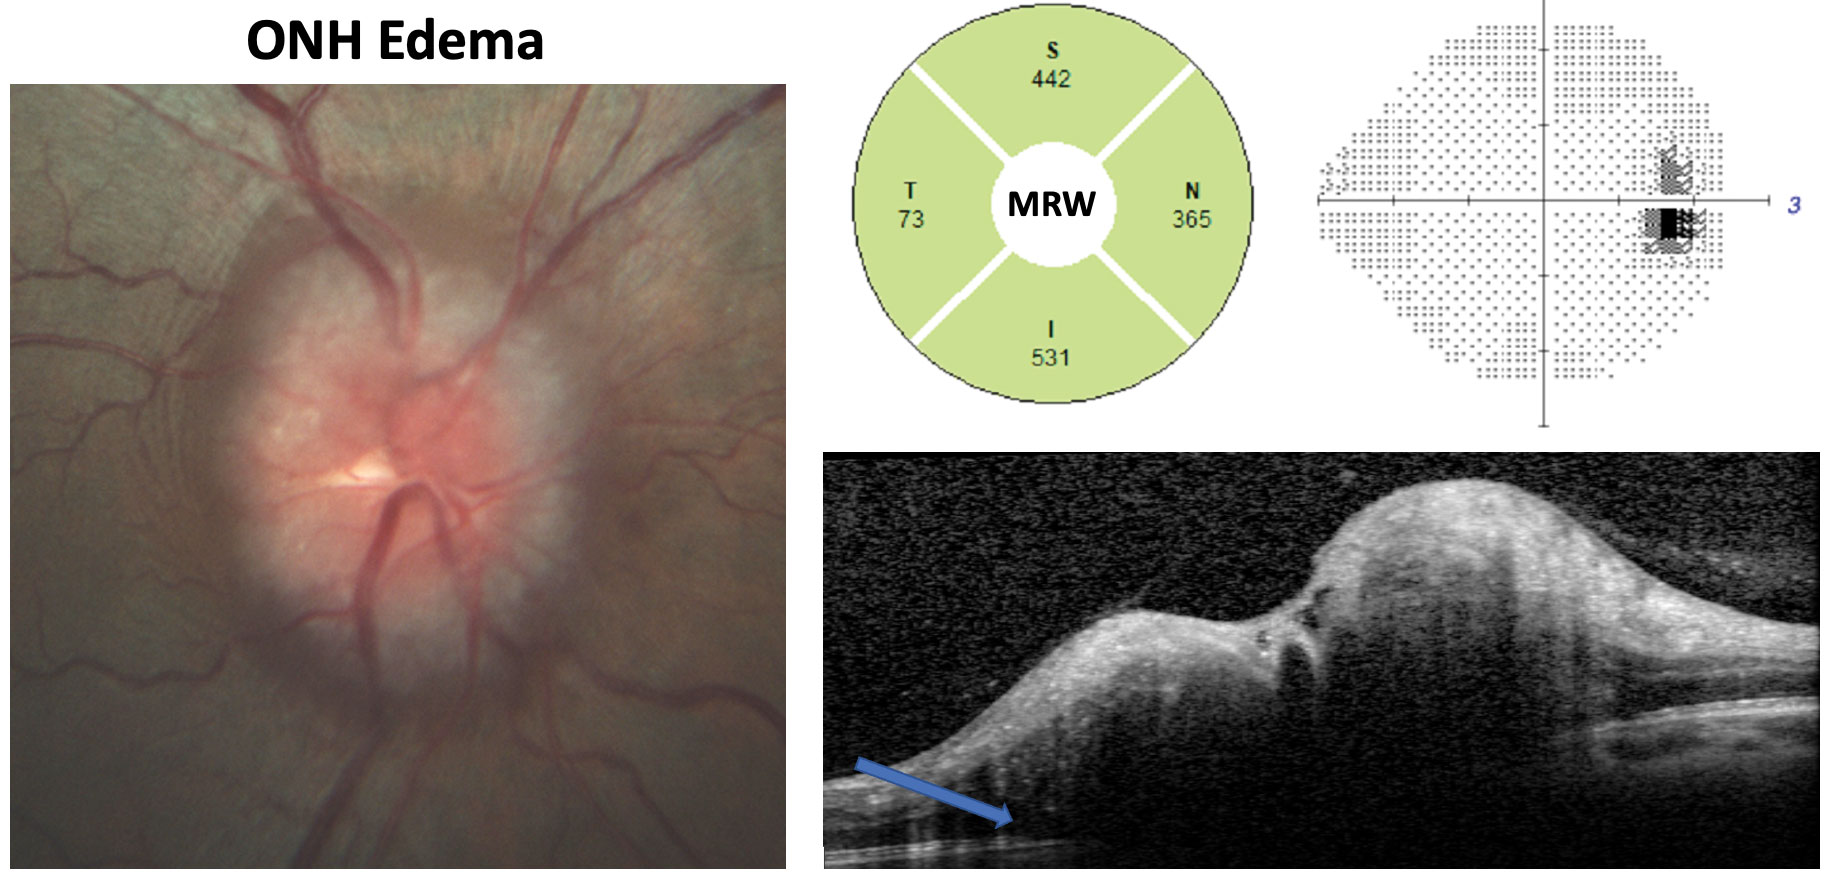 This IIH patient has an opening ICP of 42cm H2O. Fundus photography shows Frisen grade 3 edema. Note the substantially increased MRW, enlarged blind spot on the grayscale plot and the OCT cross-section showing subretinal hyporeflective space (blue arrow) consistent with ONH edema.